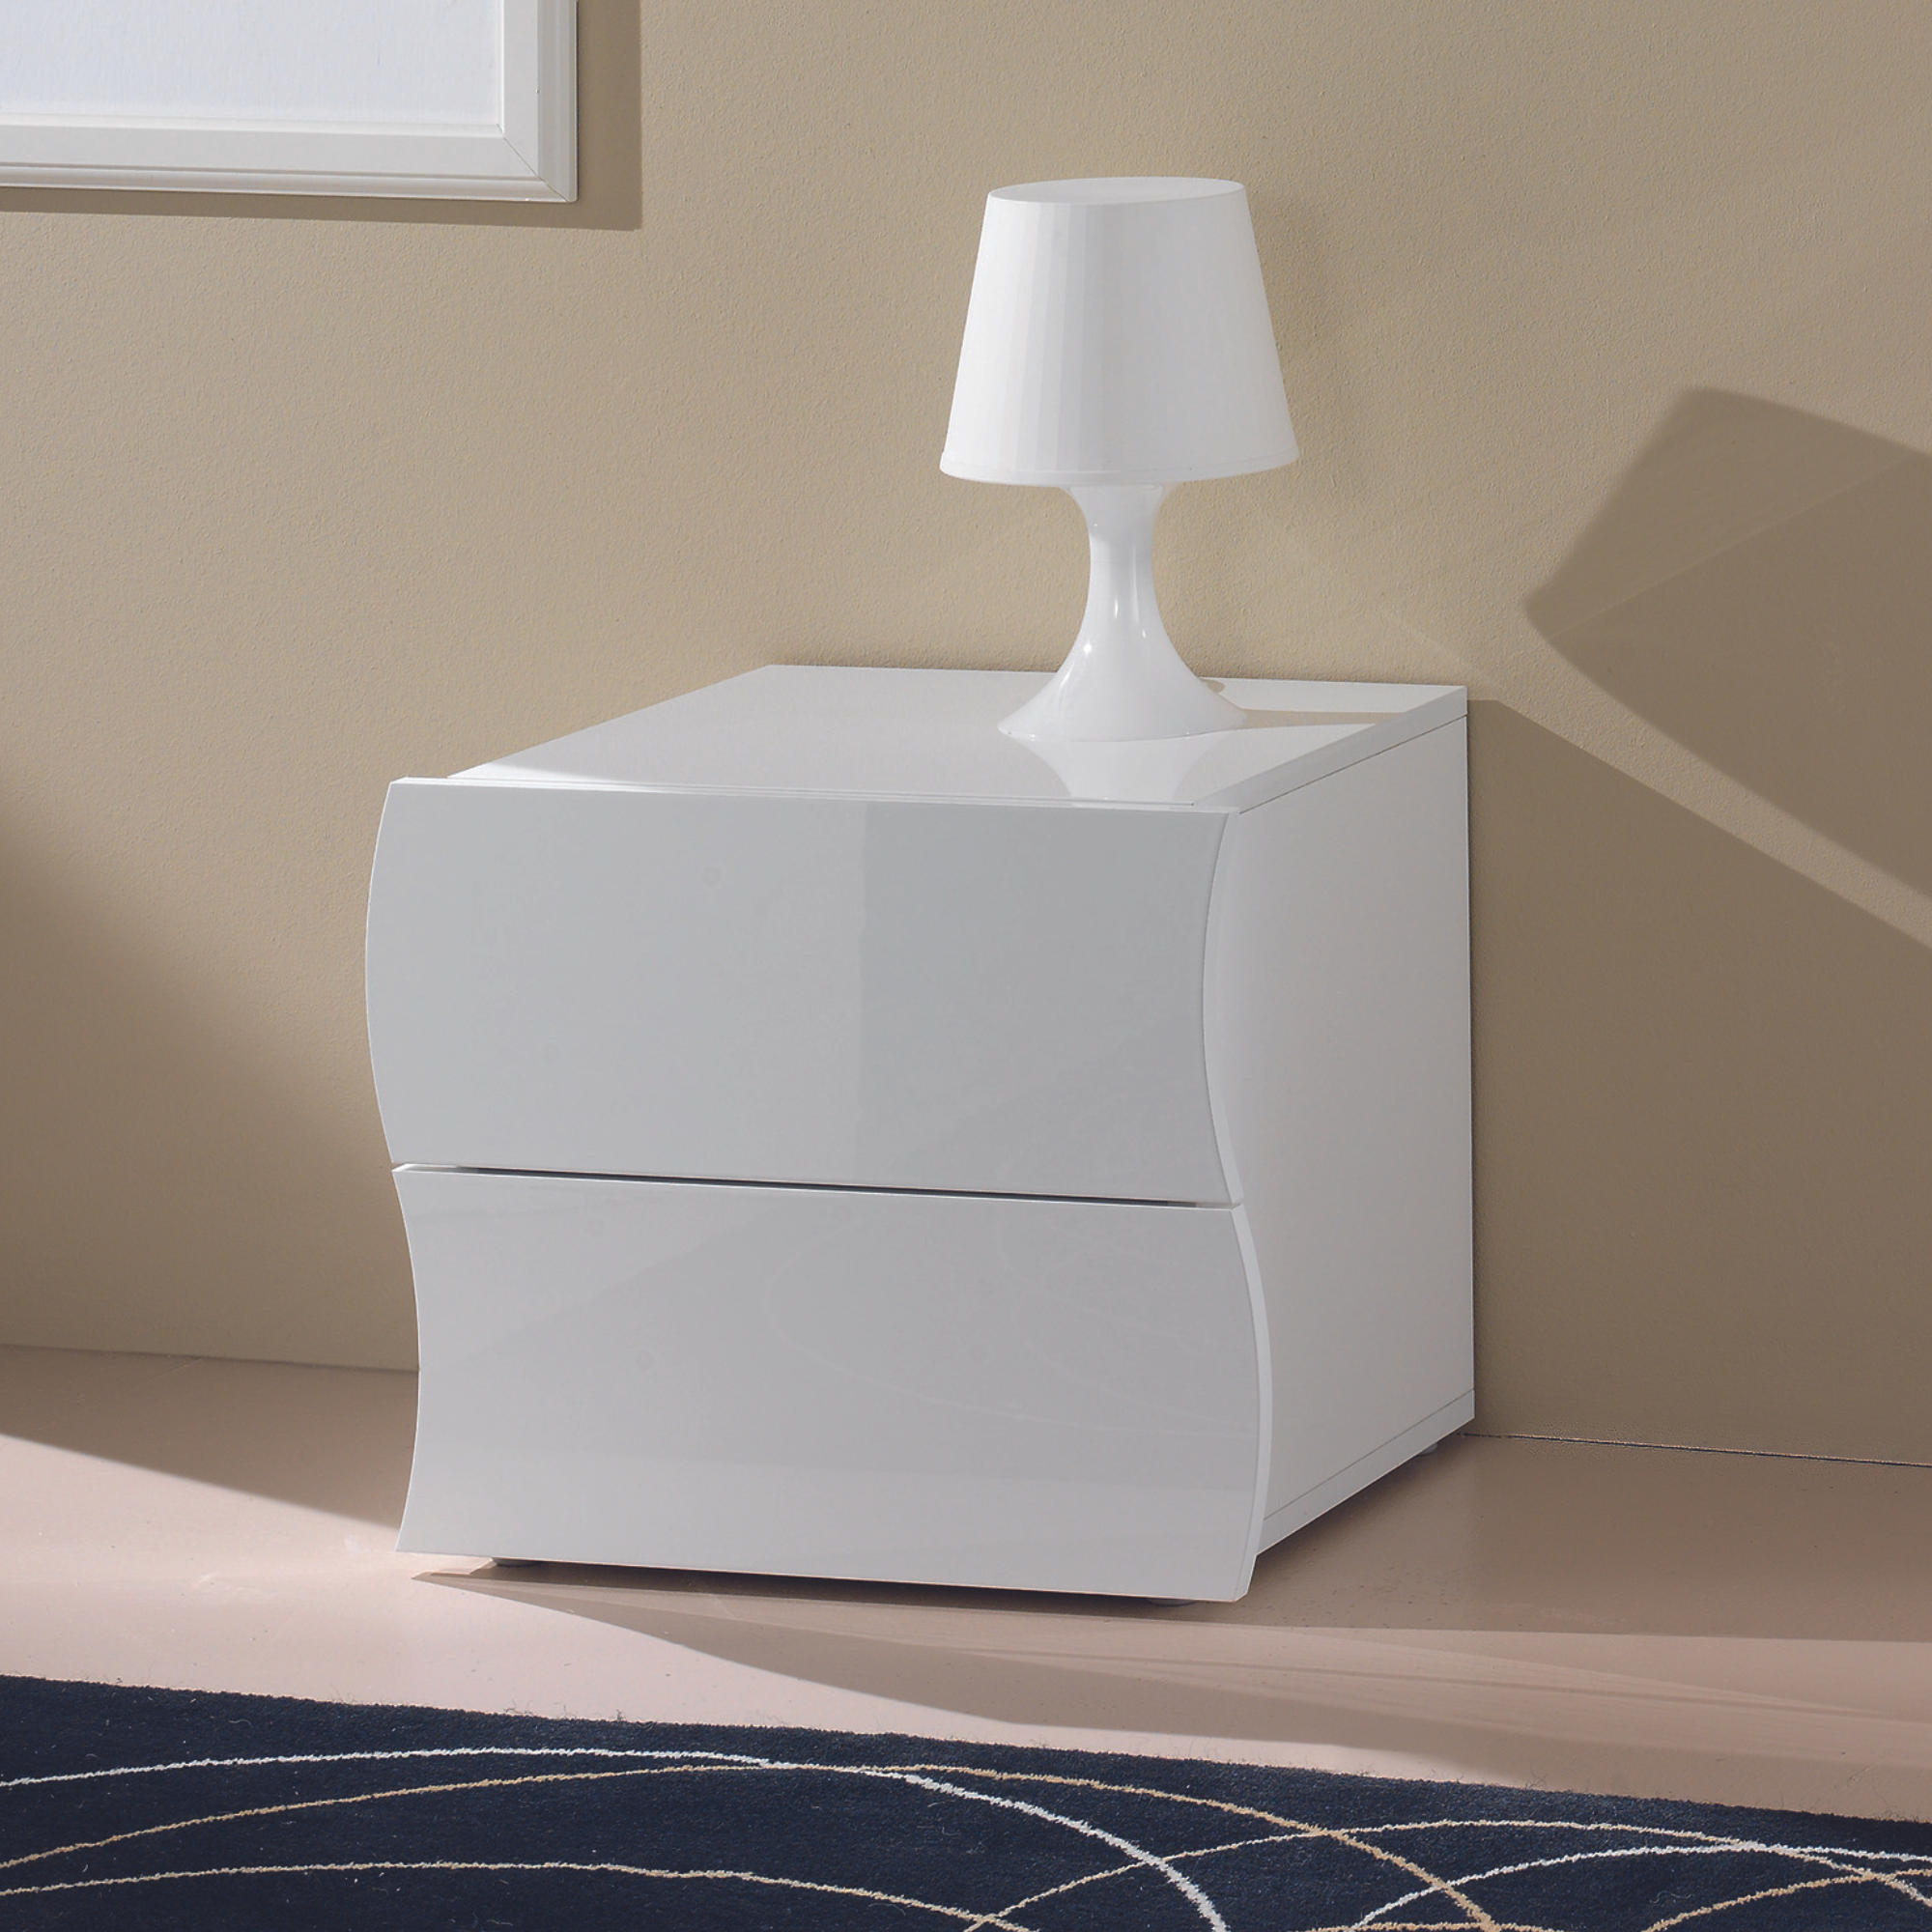 Onda Modern Glossy White Nightstand with Two Spacious Drawers - Furniture.Agency